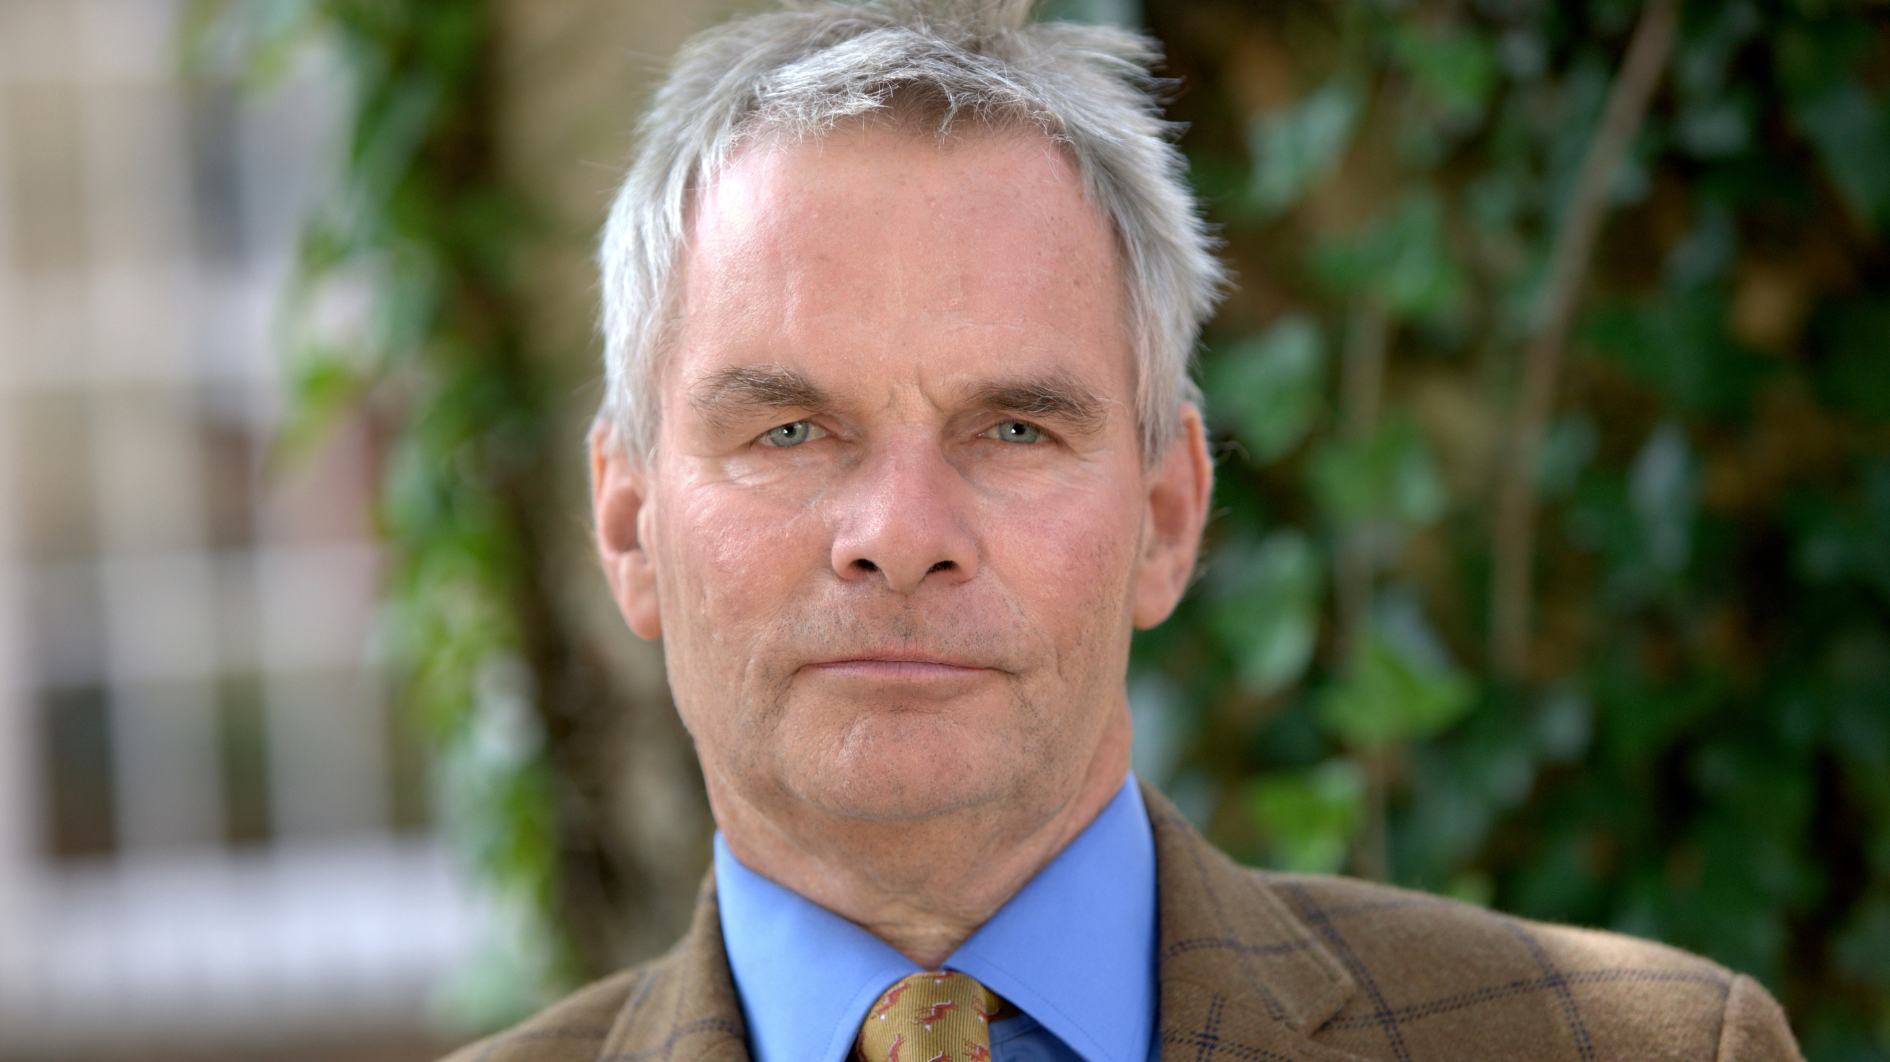 Cllr Martin Hill - a white man with grey hair wearing a blue shirt, beige tie and jacket.